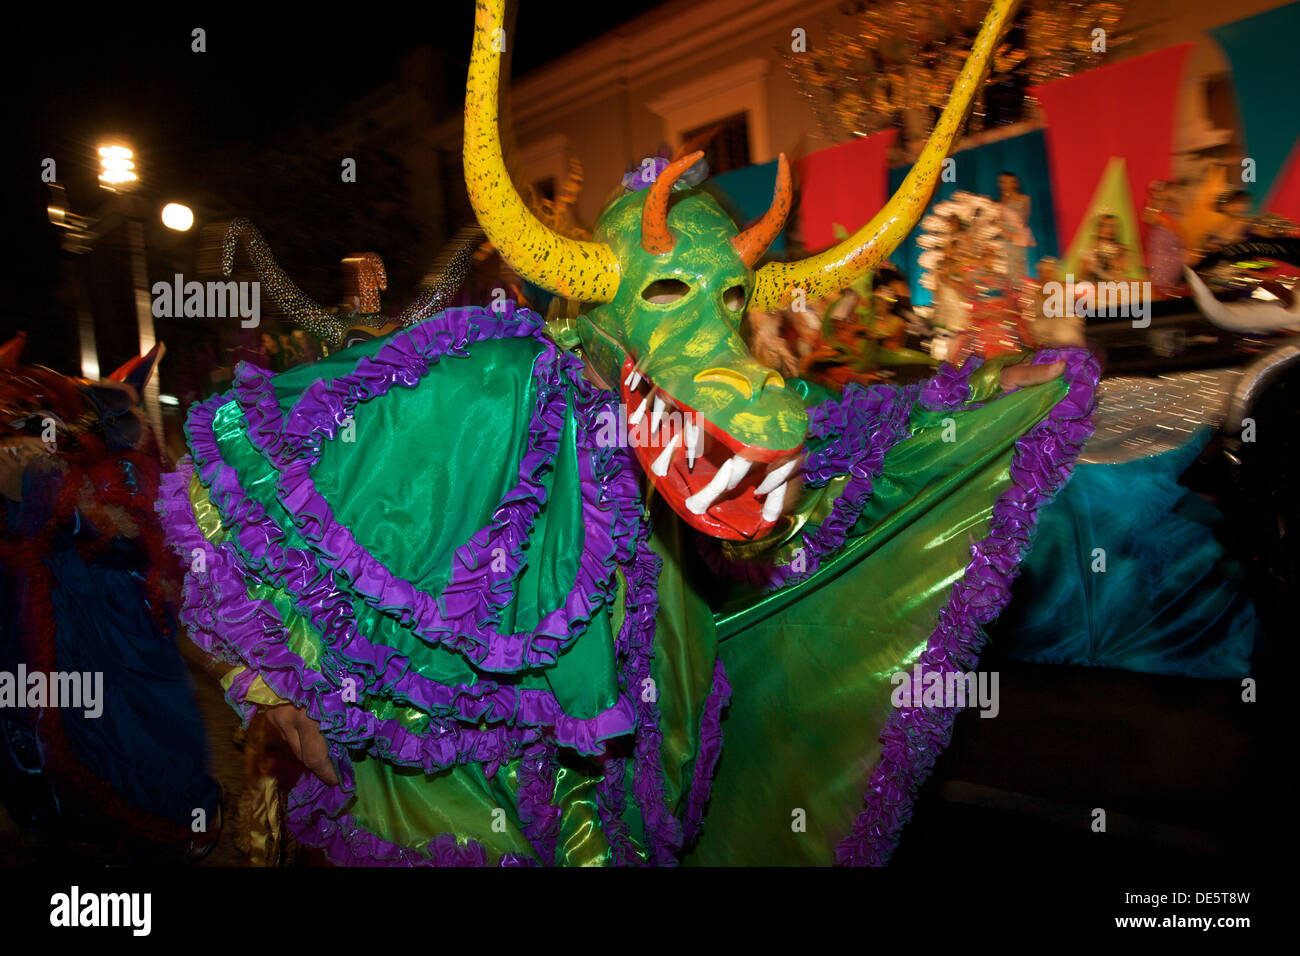 A costumed reveler called a vejigante dances in the streets during the Carnaval de Ponce February 21, 2009 in Ponce, Puerto Rico. Vejigantes are a folkloric character representing the devil. Stock Photo